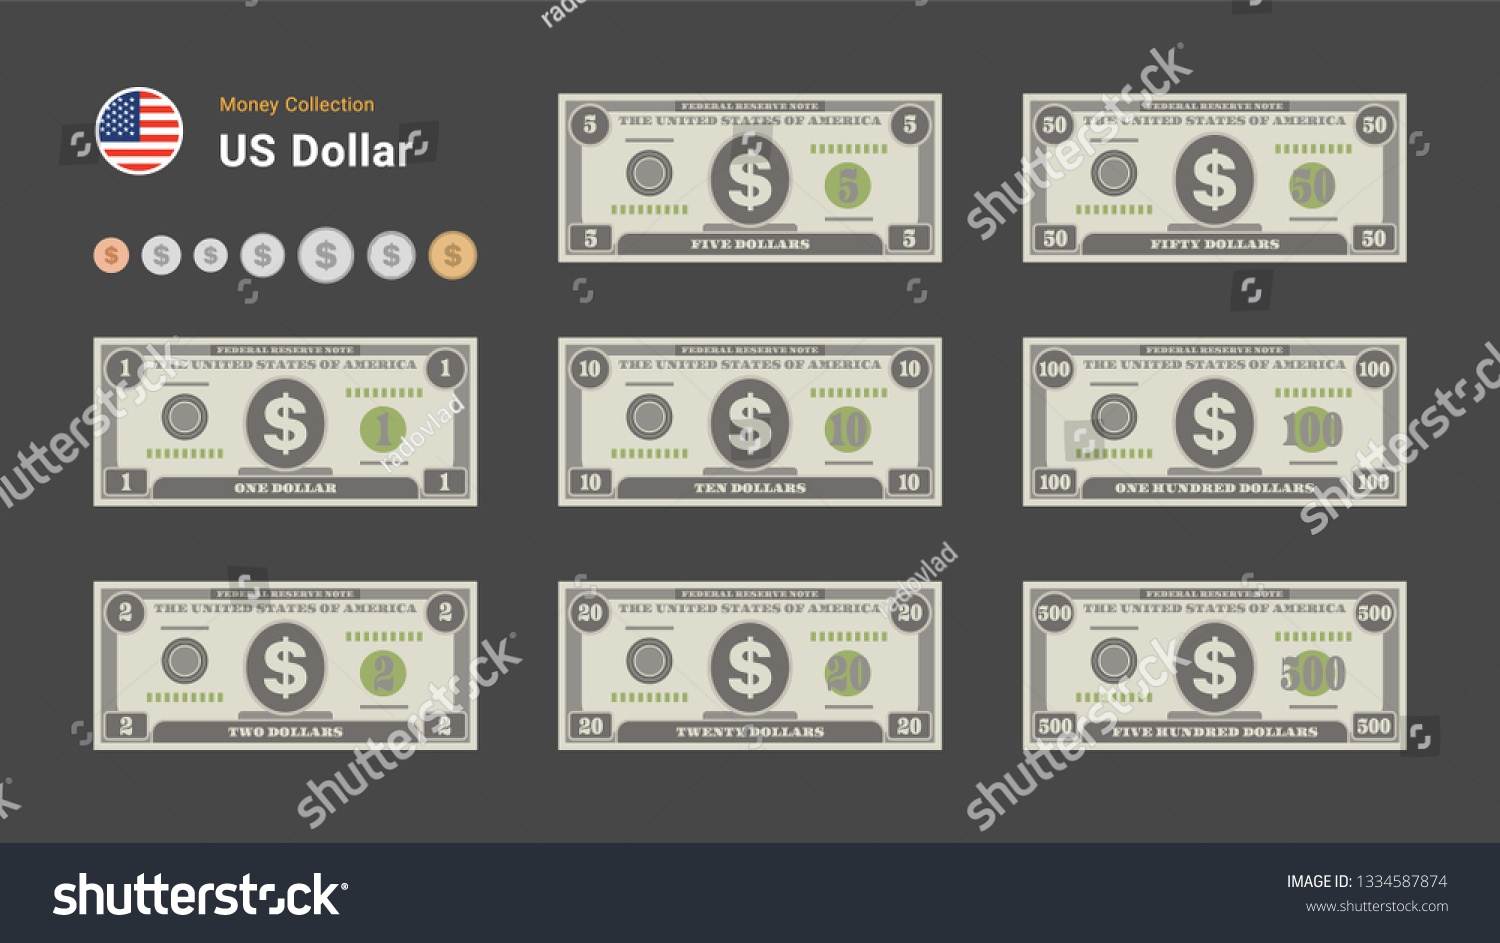 US Dollar bills. American money banknotes and coins. Currency vector set. Stylized drawing of bills. Flat vector illustration. #1334587874